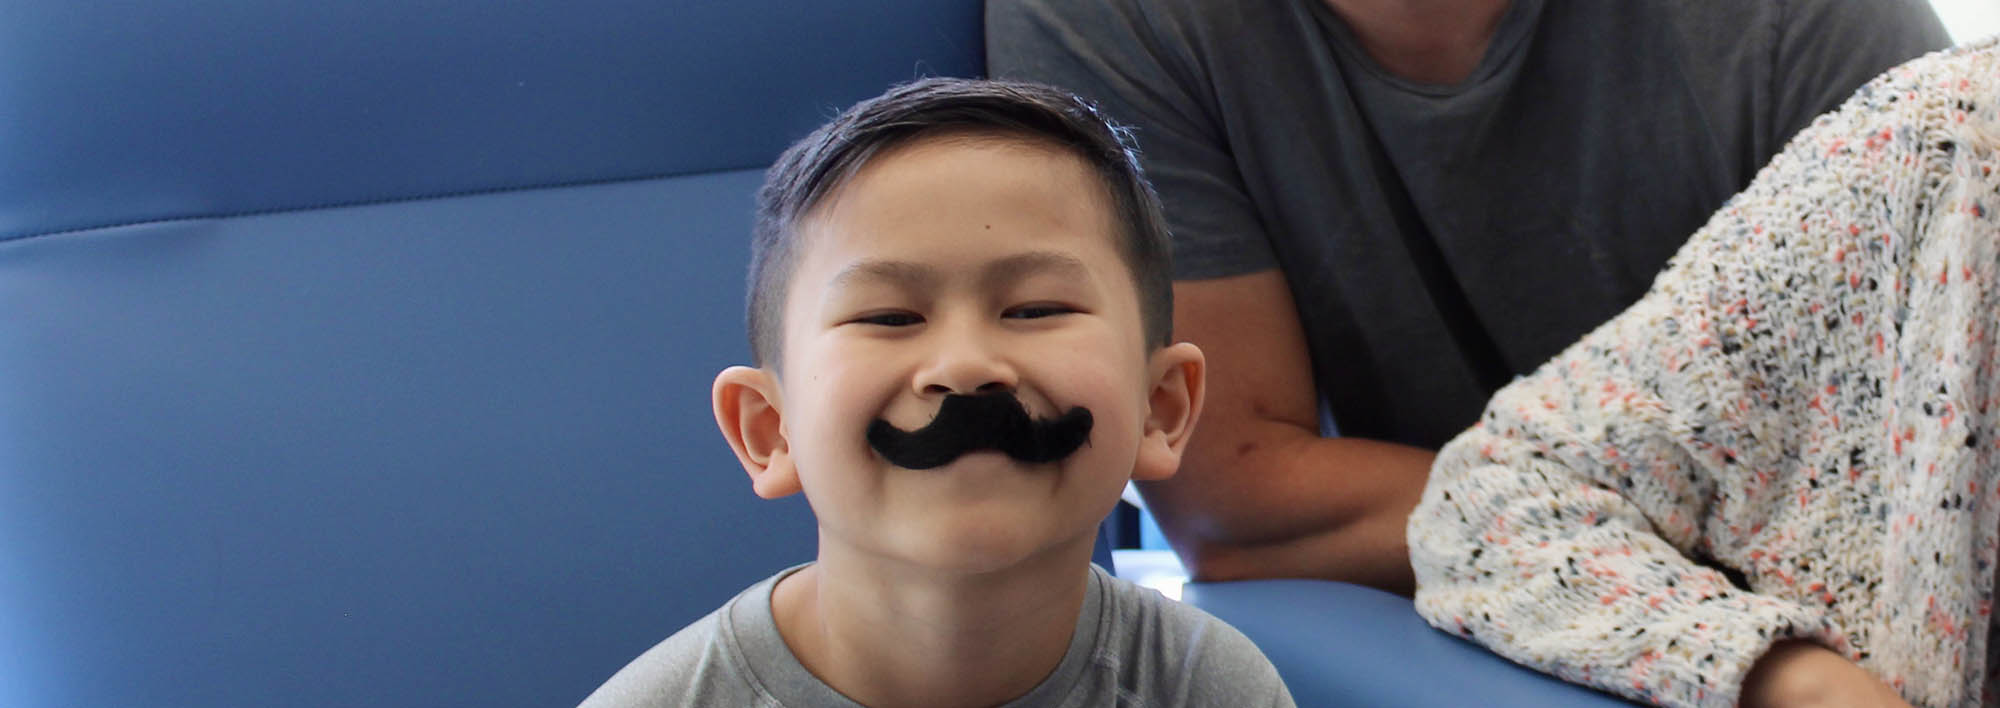 Jackson smiling with a fake moustache